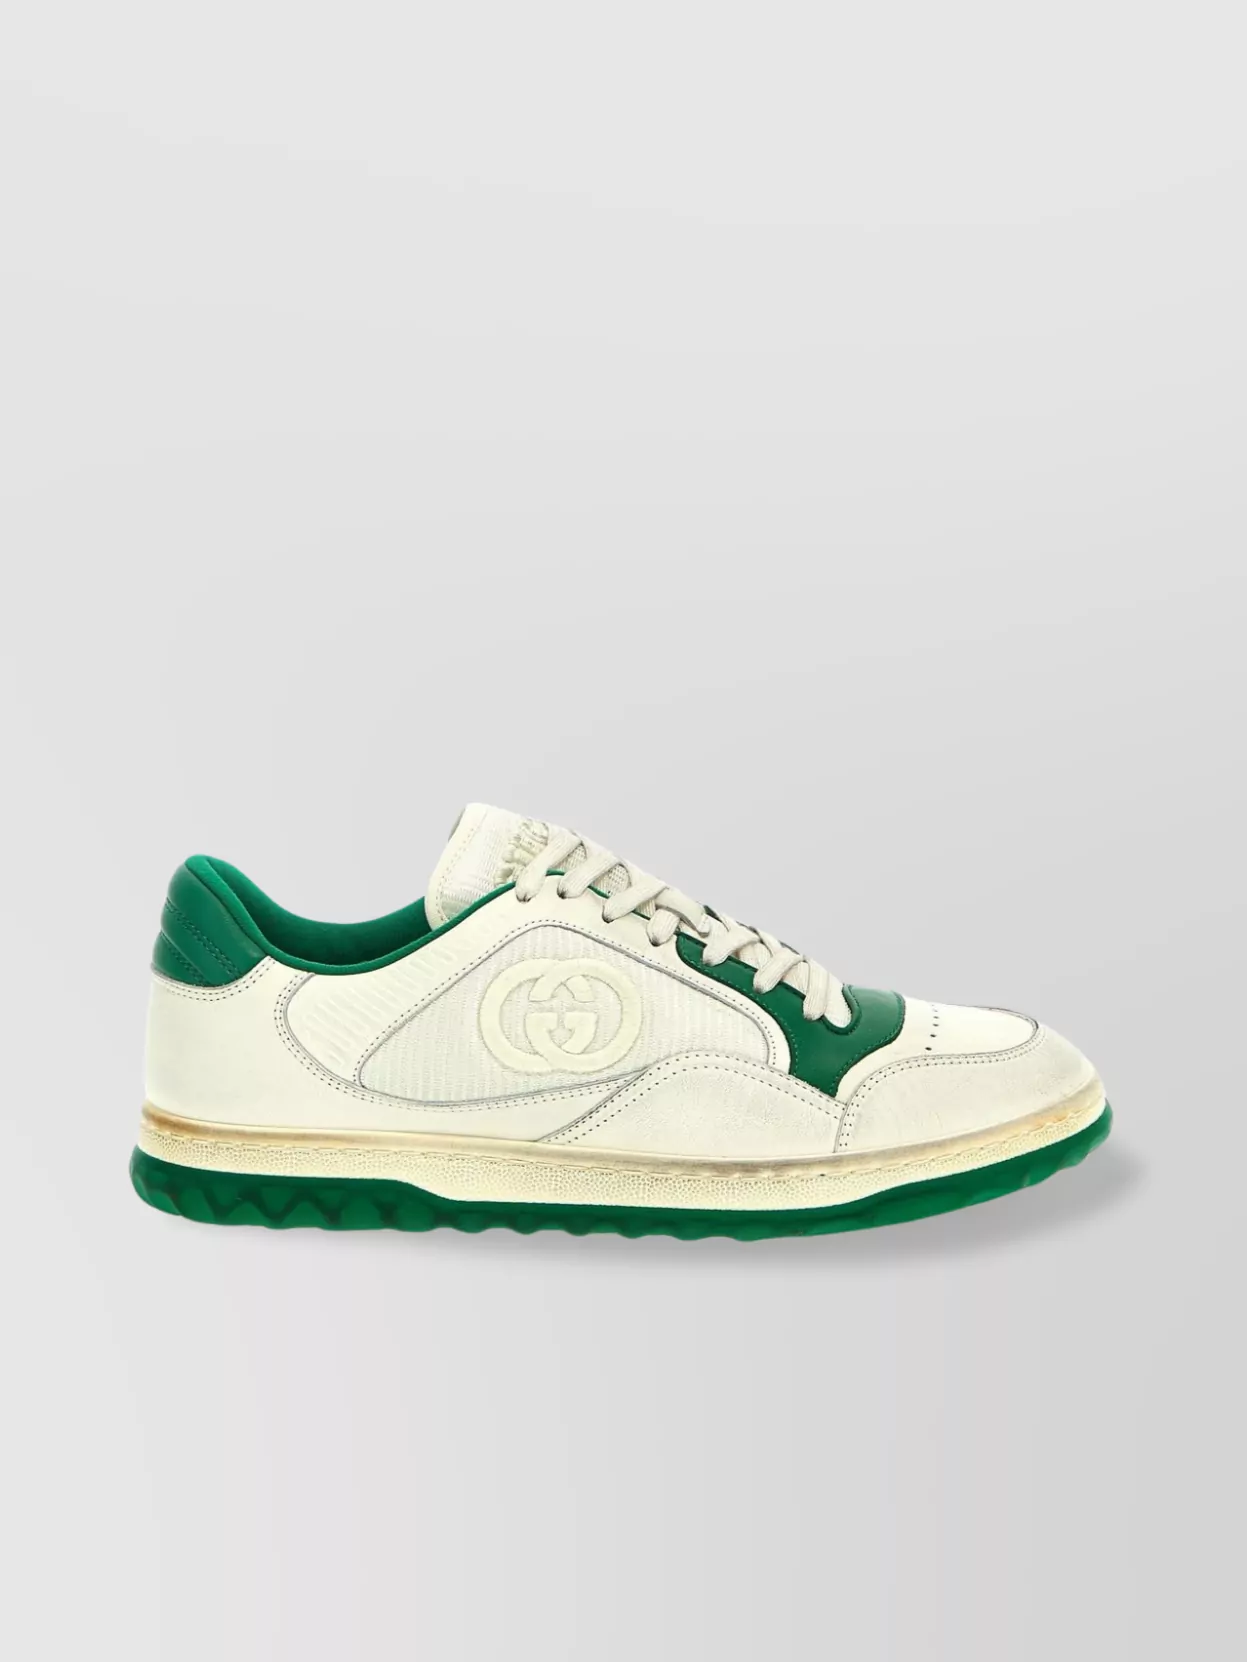 Gucci '80mac' Sneakers Featuring Contrast Panels In Green